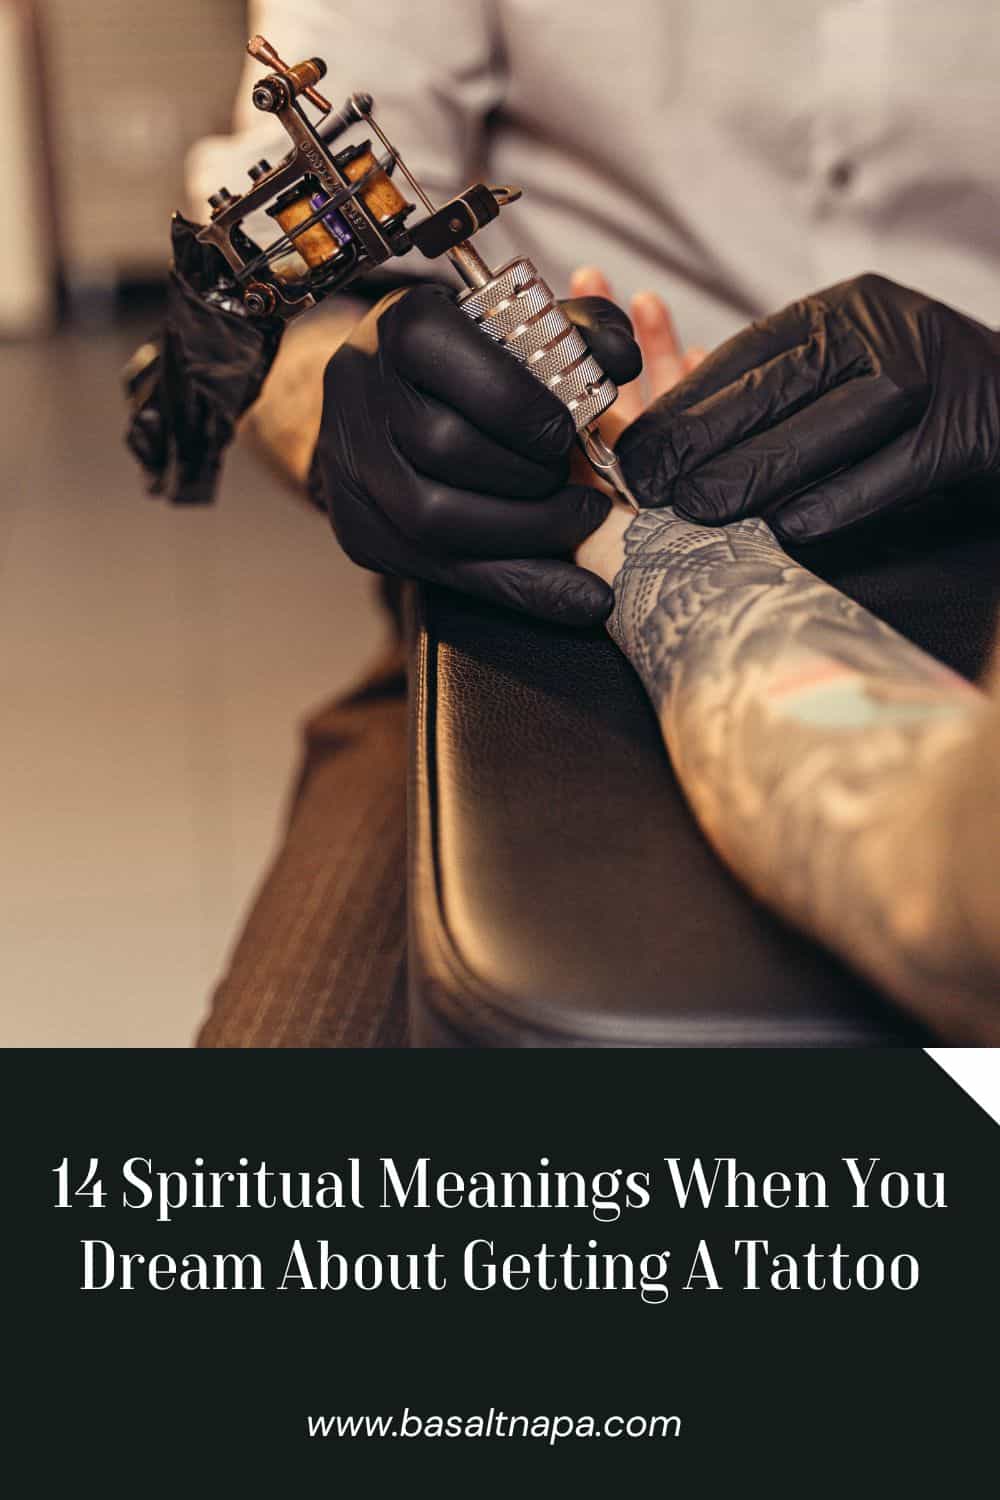 14 Spiritual Meanings When You Dream About Getting A Tattoo